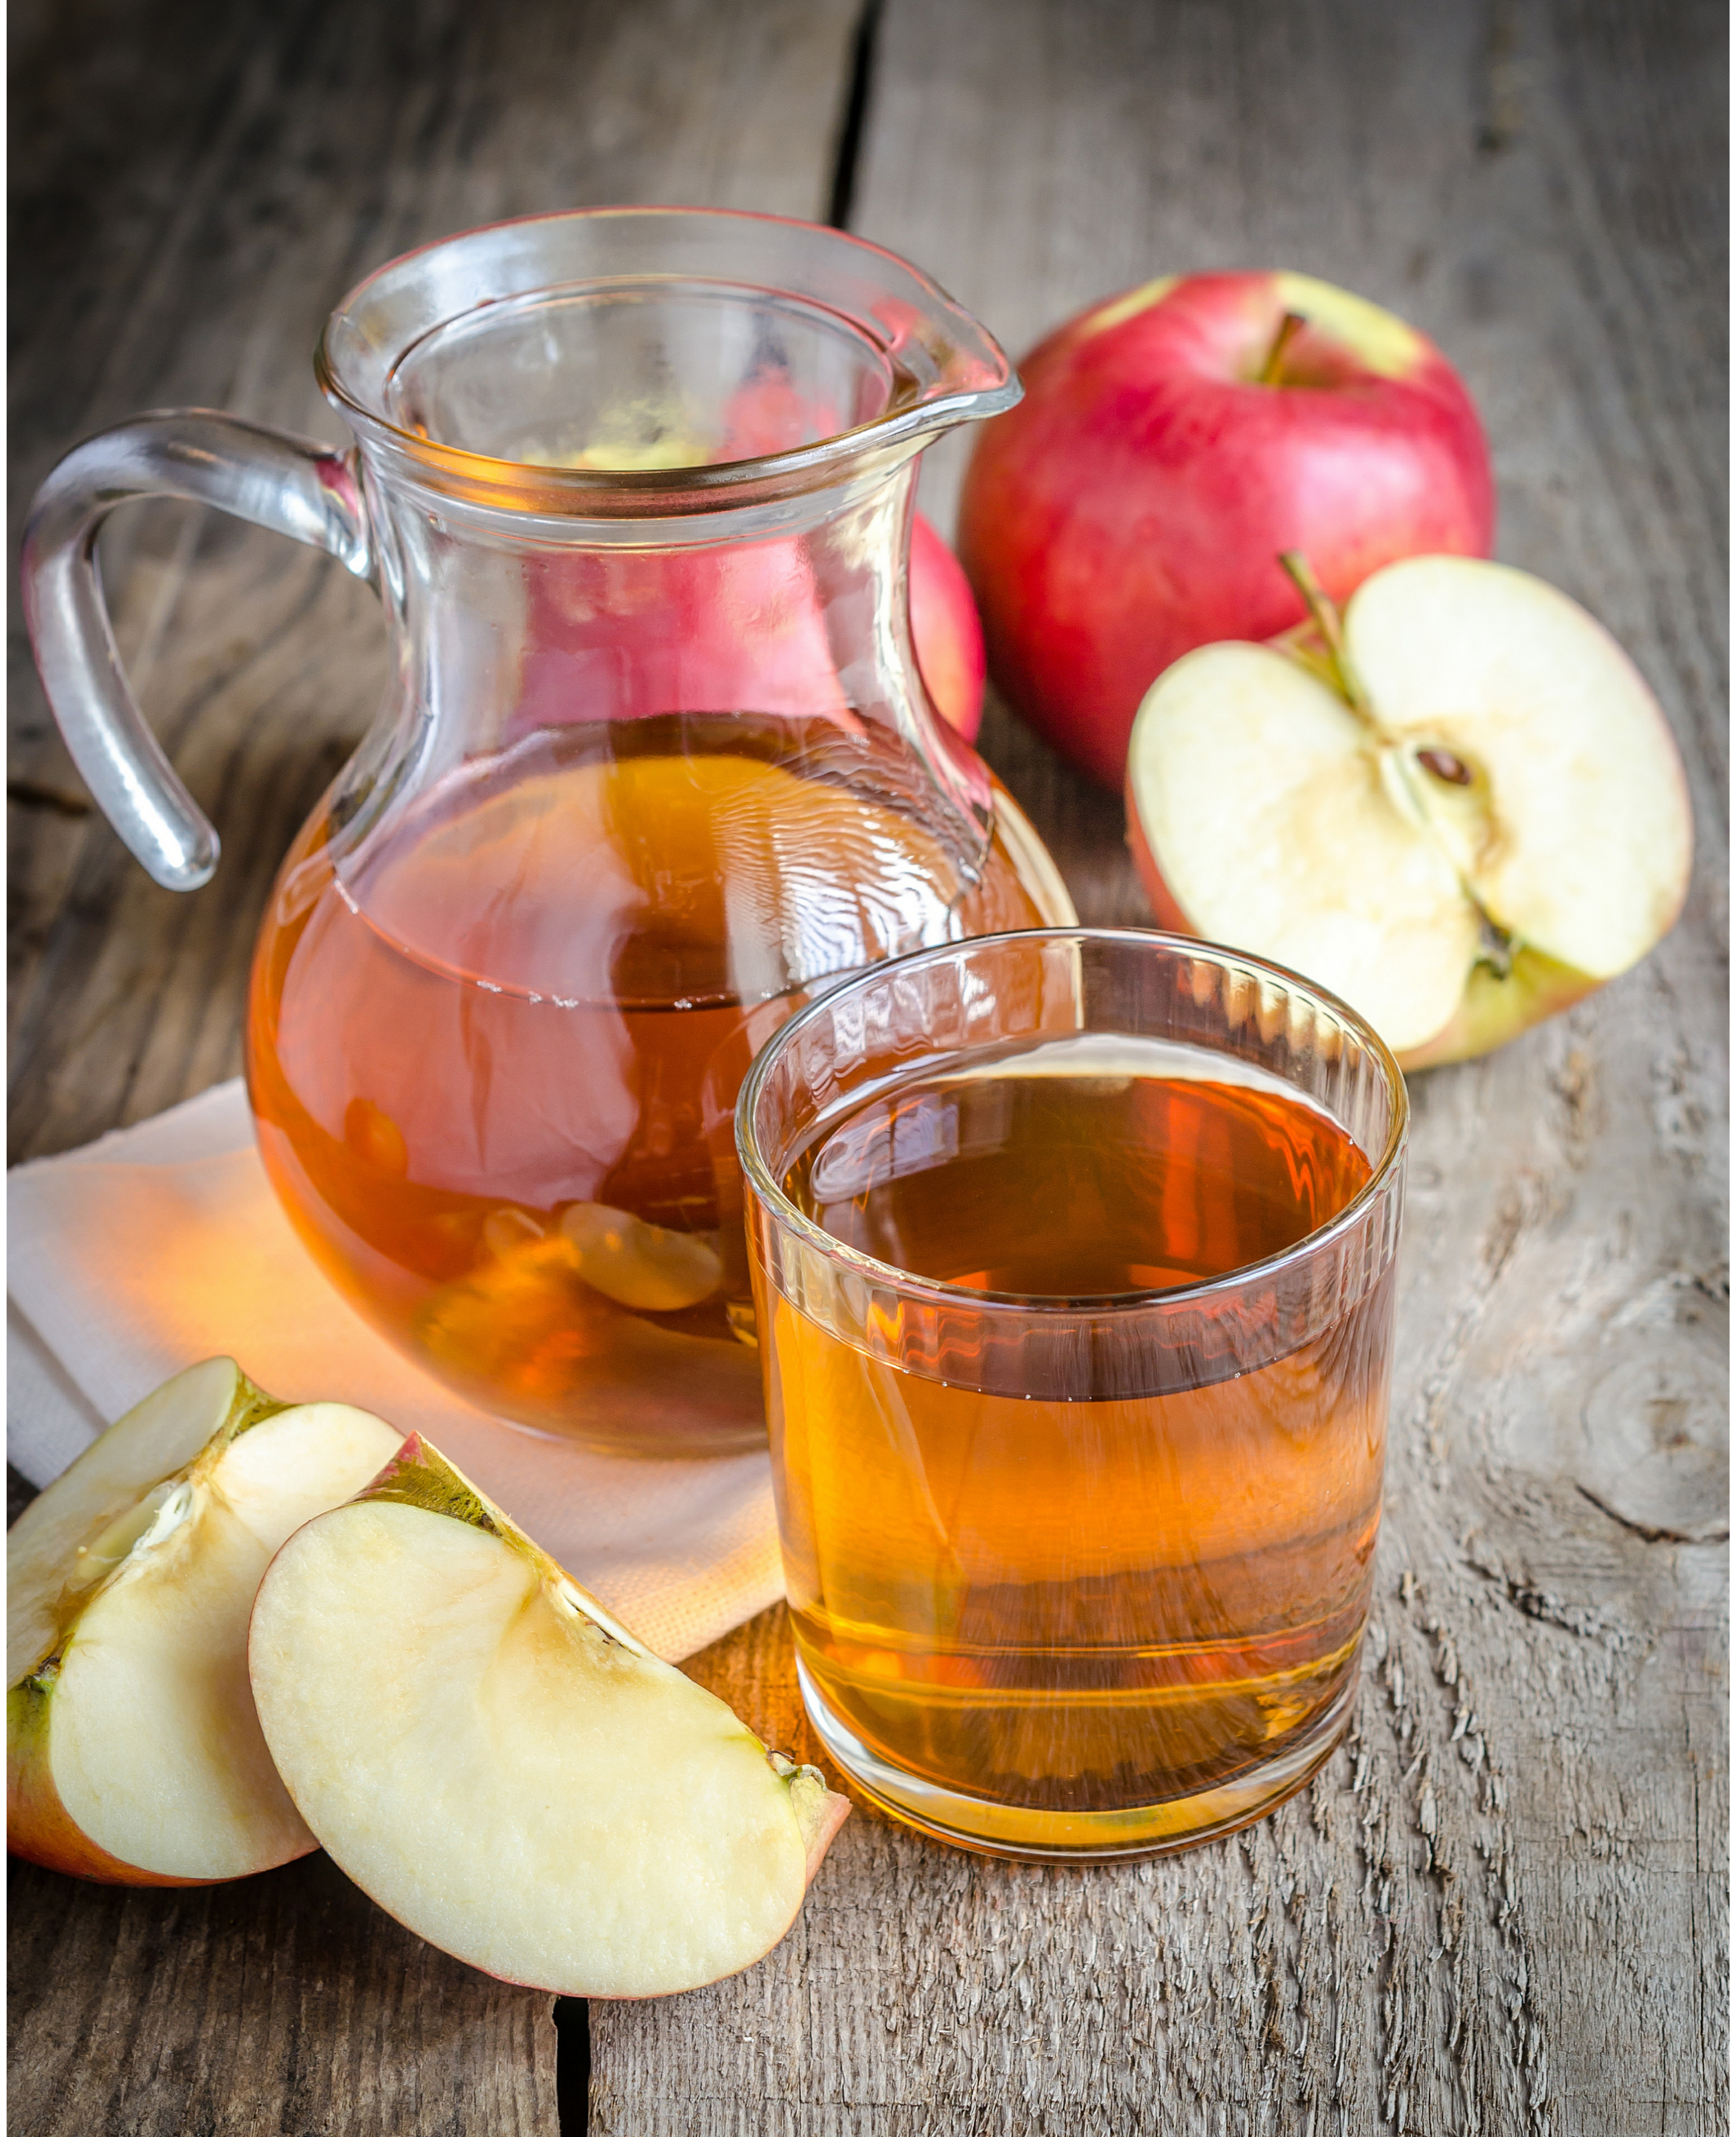 Homemade Apple Juice Recipe Without Juicer